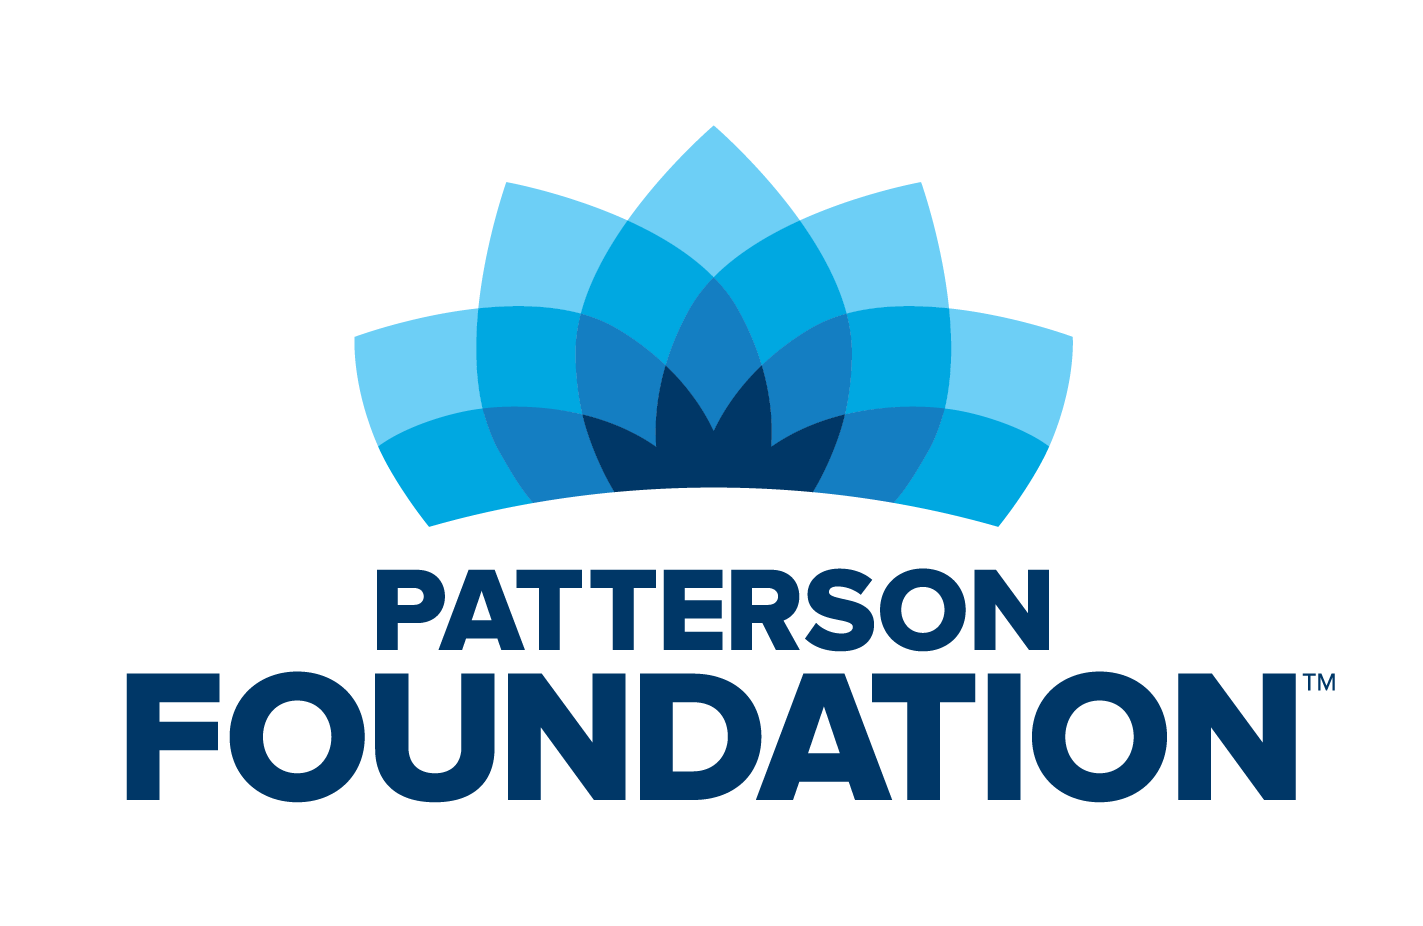 PattersonFoundation_logo_full2_rgb.png